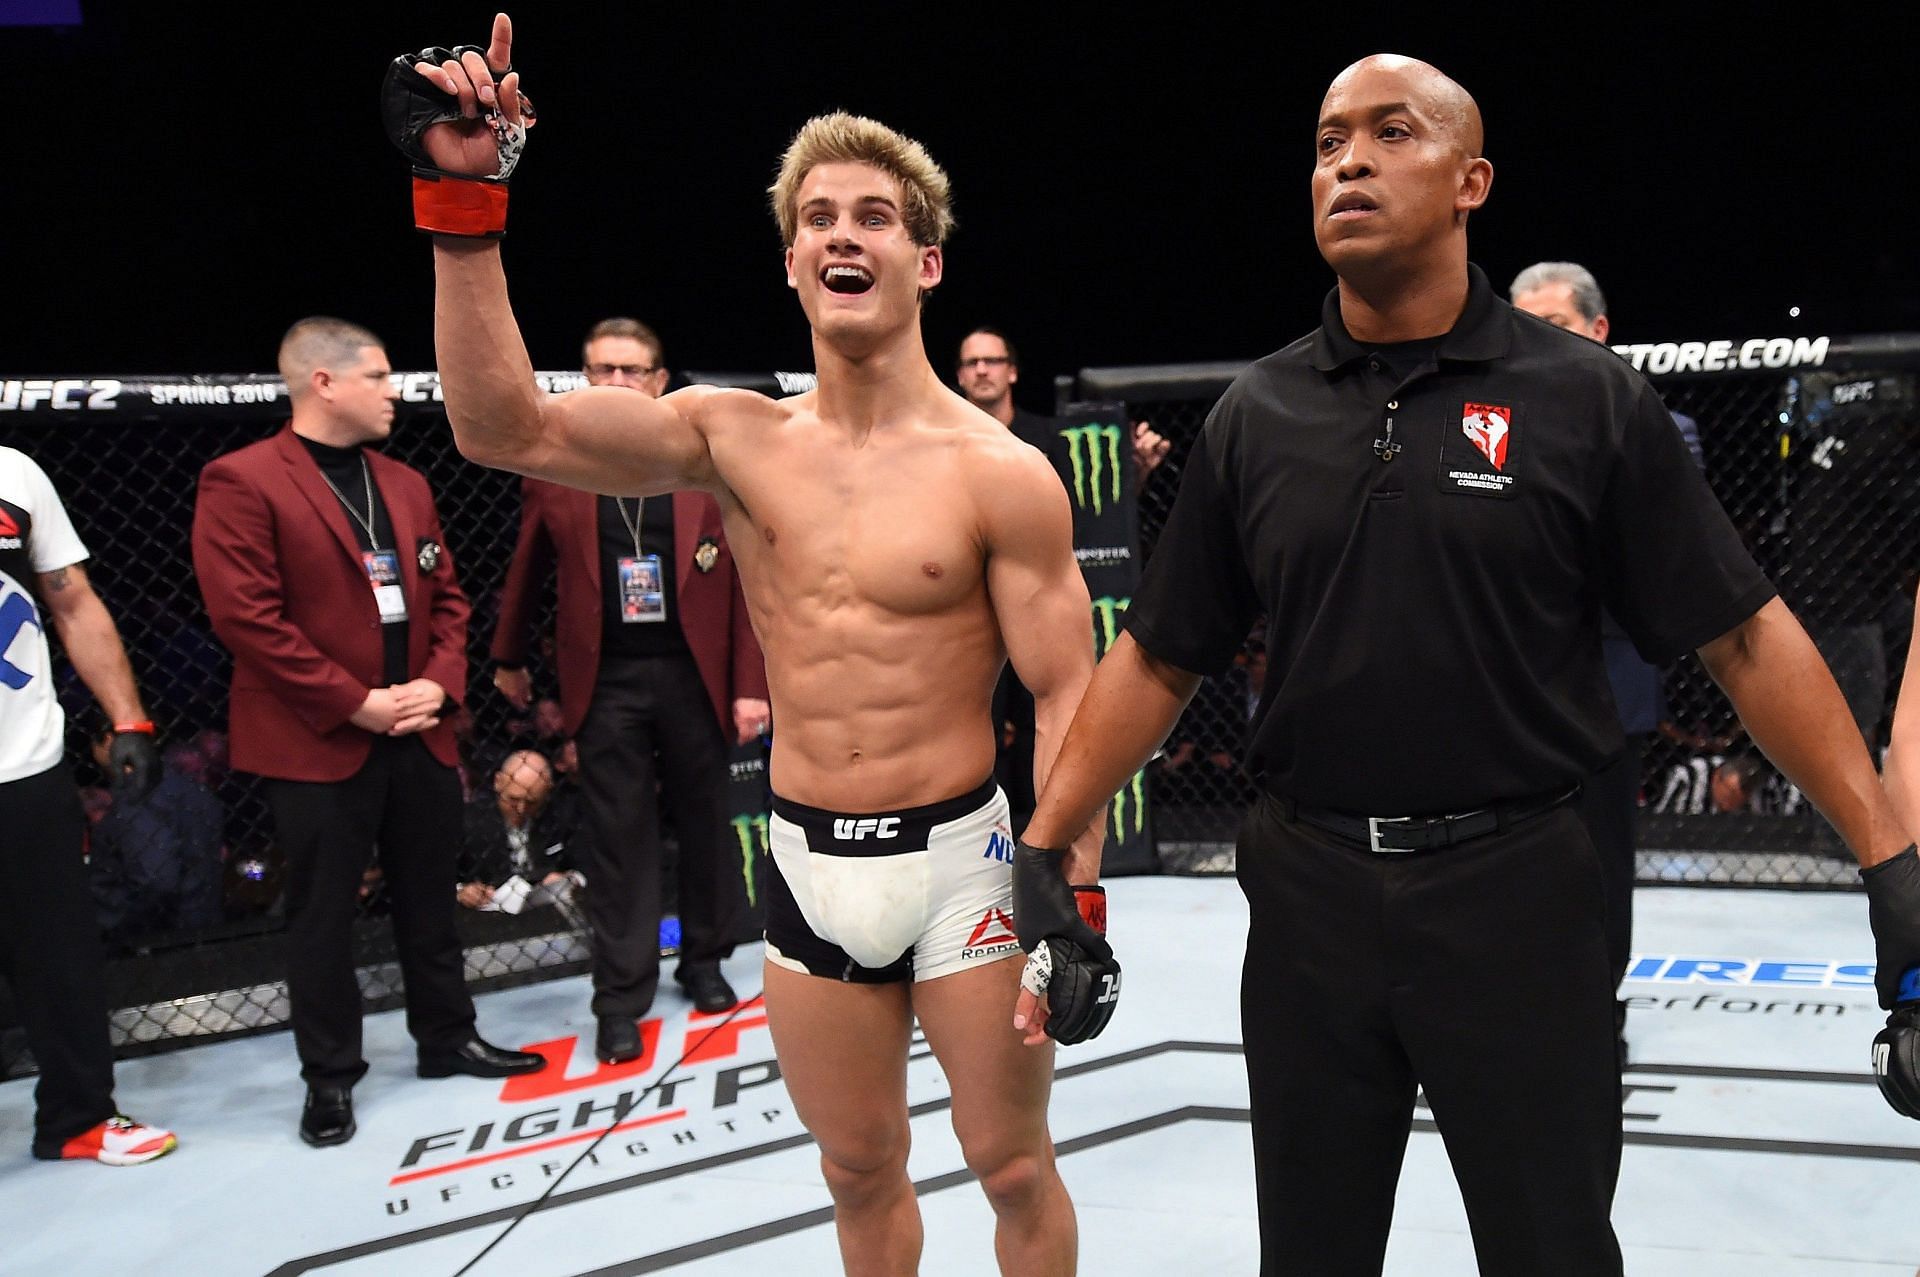 Some fans suspected Sage Northcutt was getting preferential treatment from the UFC